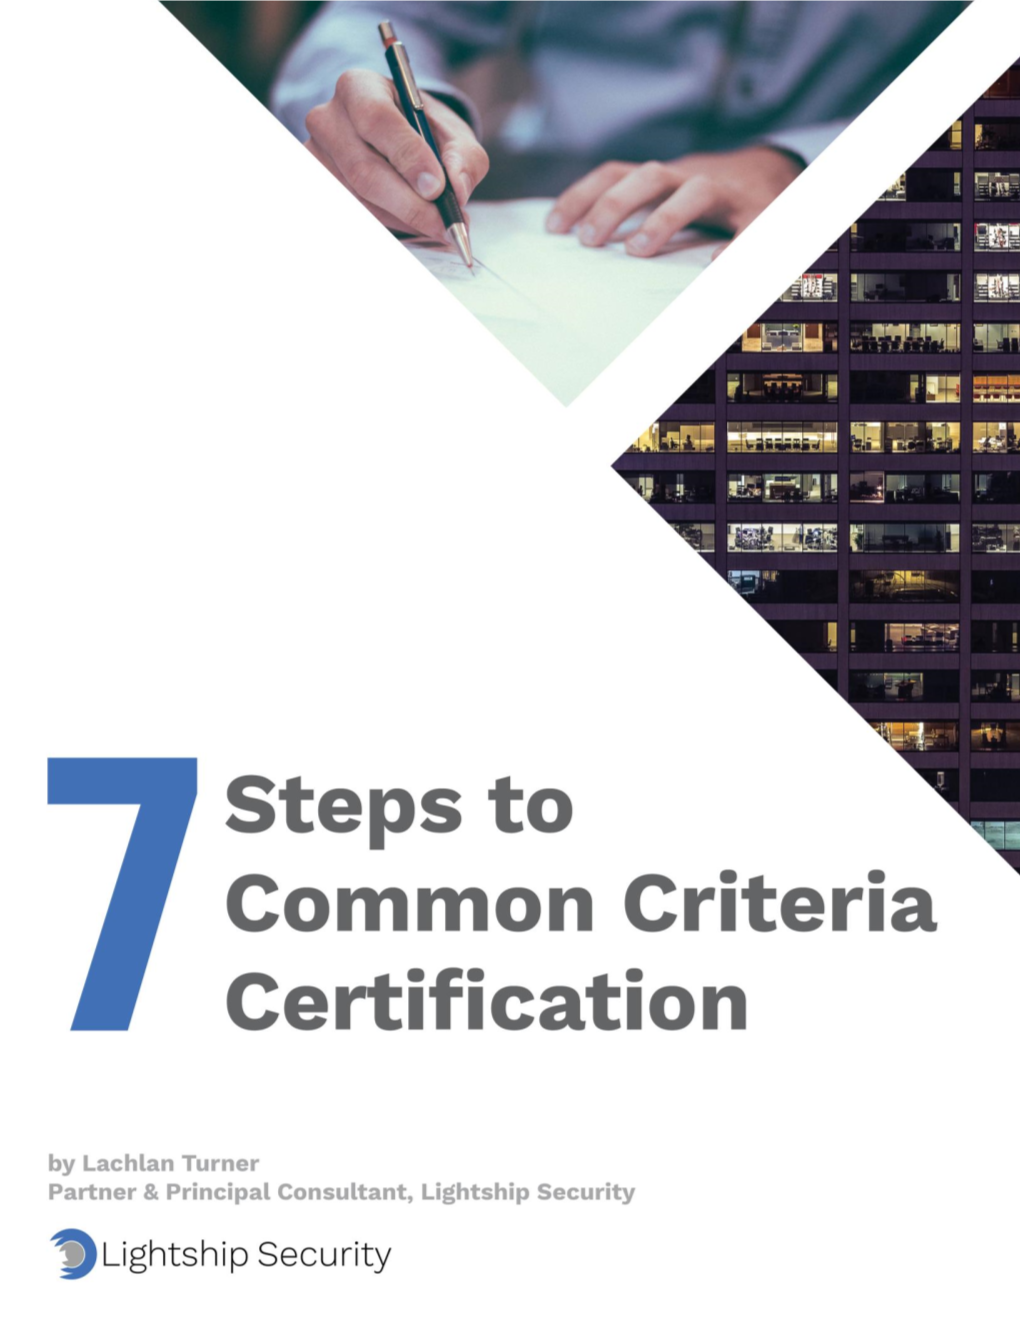 Ebook Presents the Broad Steps Towards Achieving Common Criteria Certification